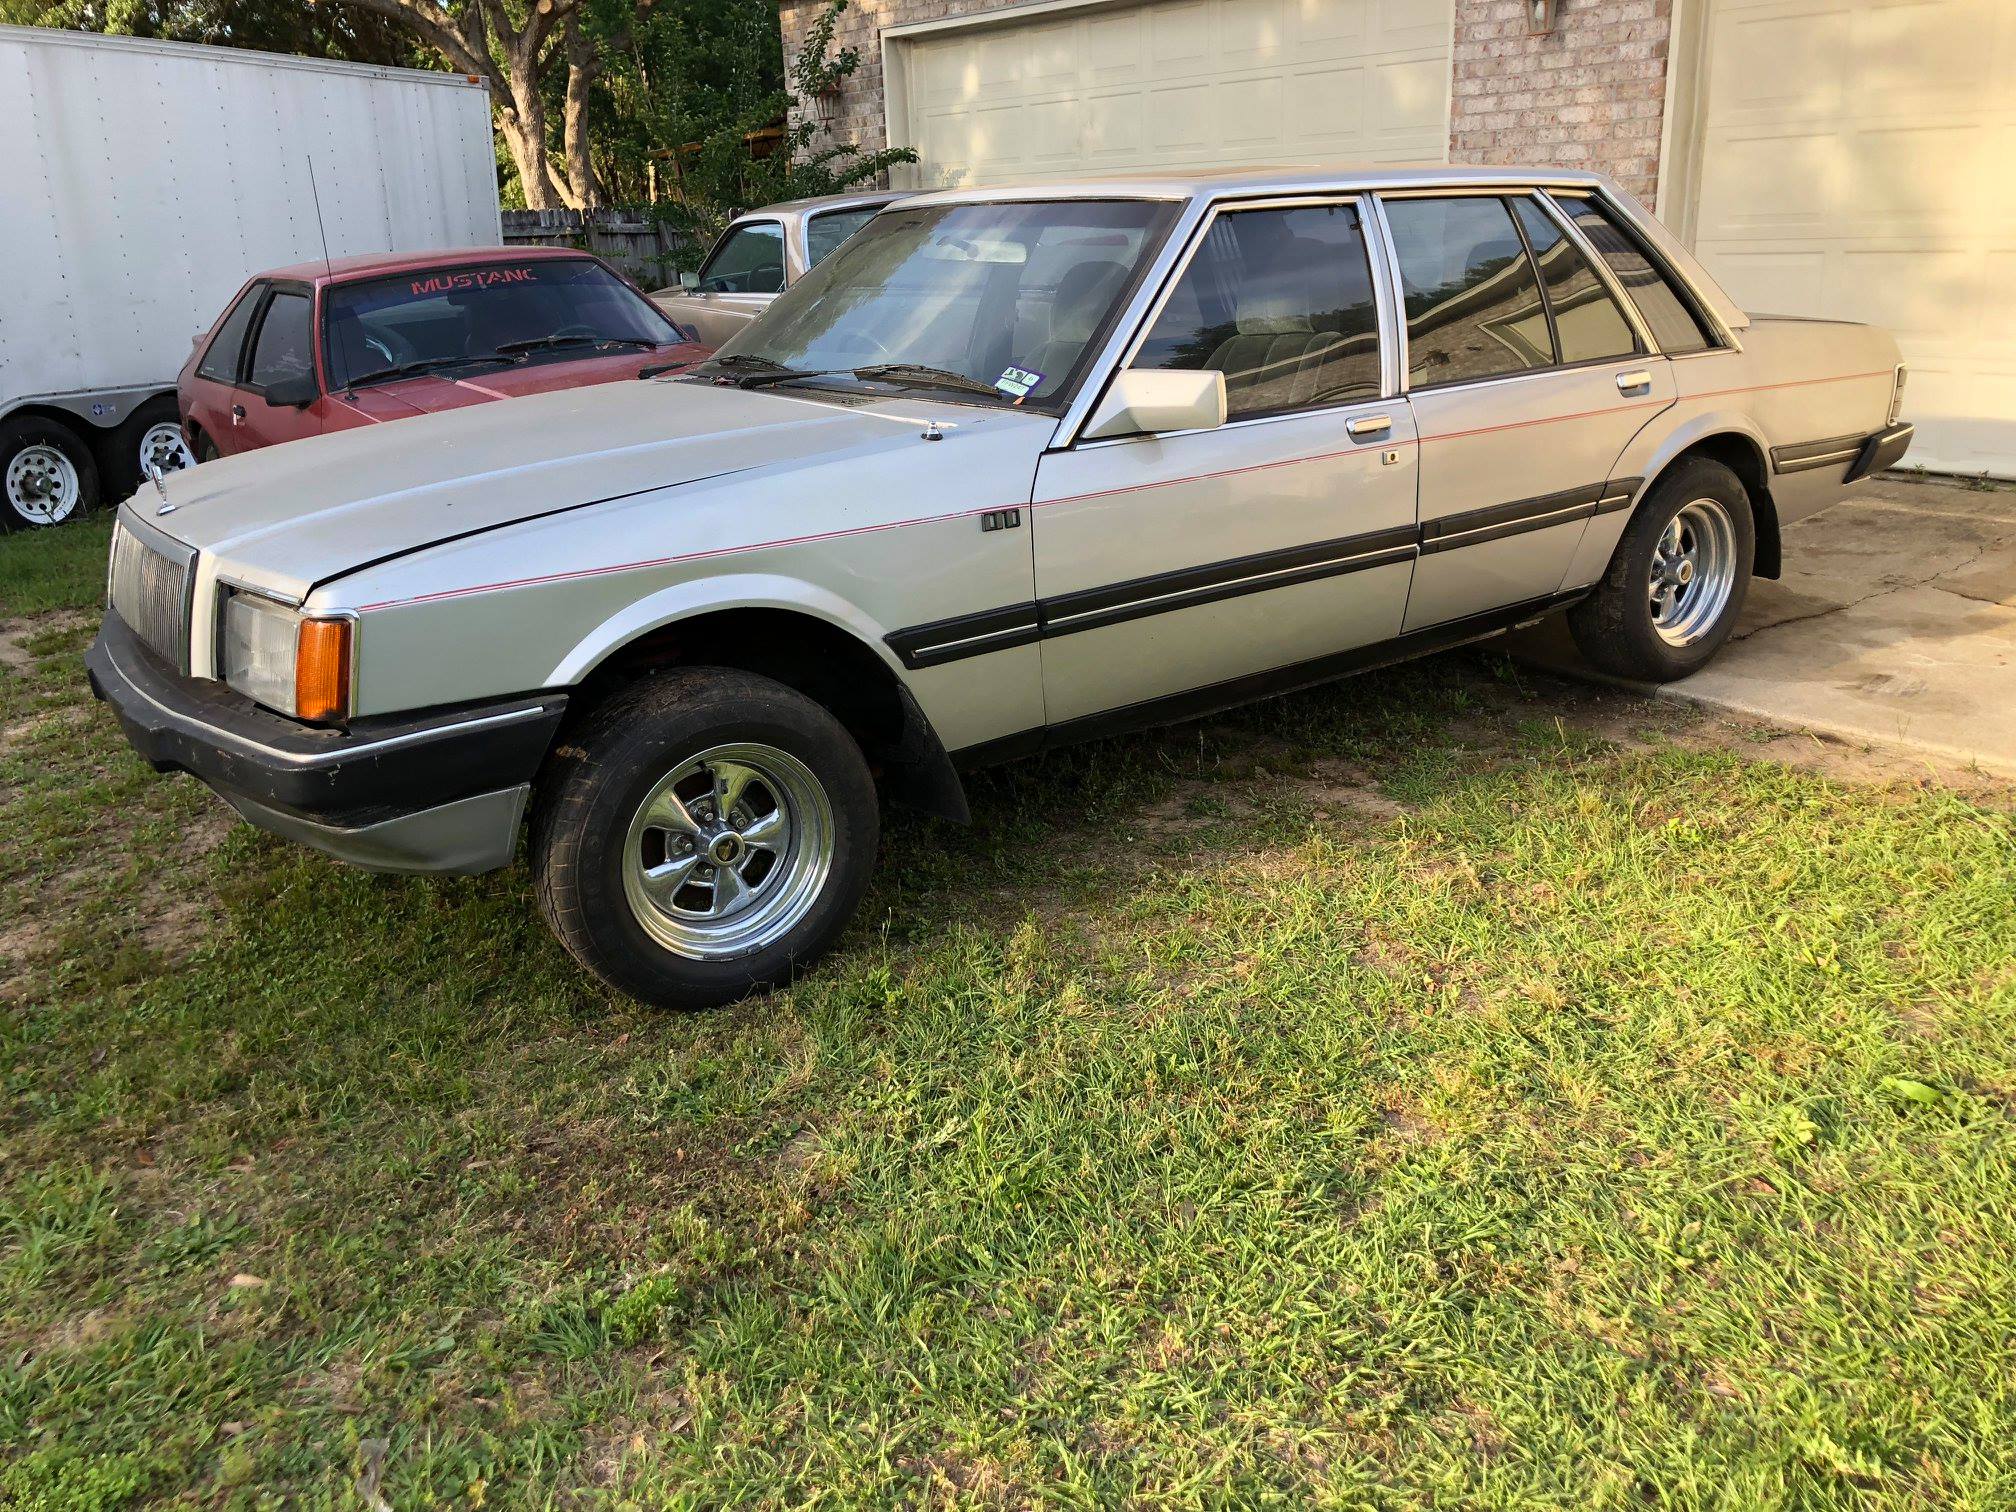 How Would You Build This Australian 1982 Ford LTD? Legroom For Days In This Beauty!